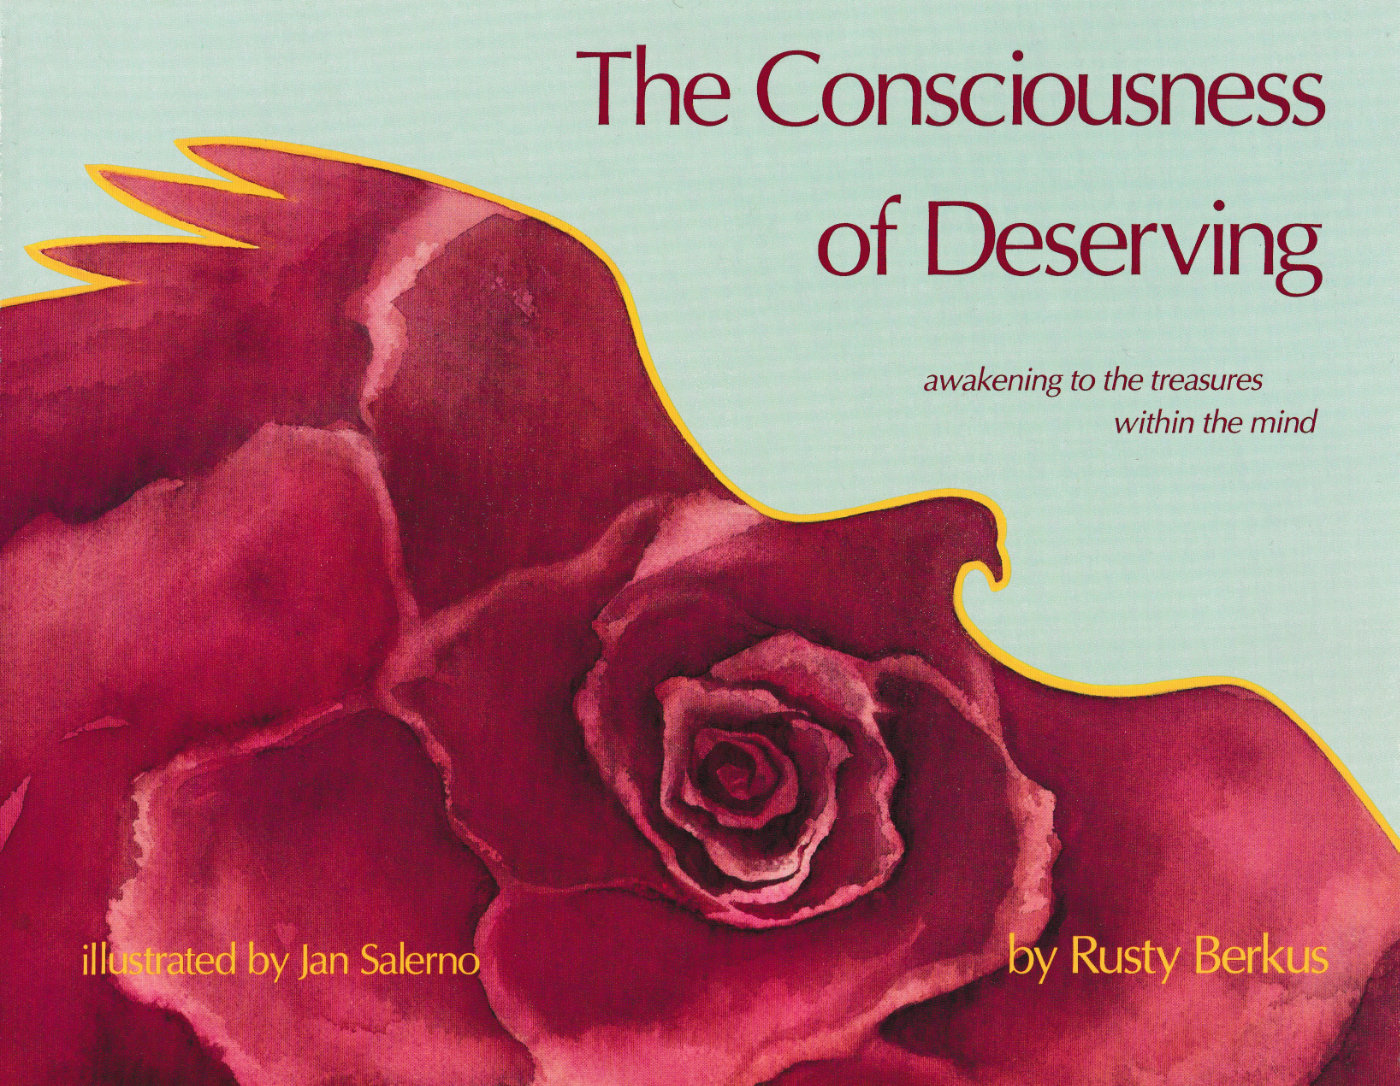 The Consciousness of Deserving: Awakening to the Treasures Within the Mind